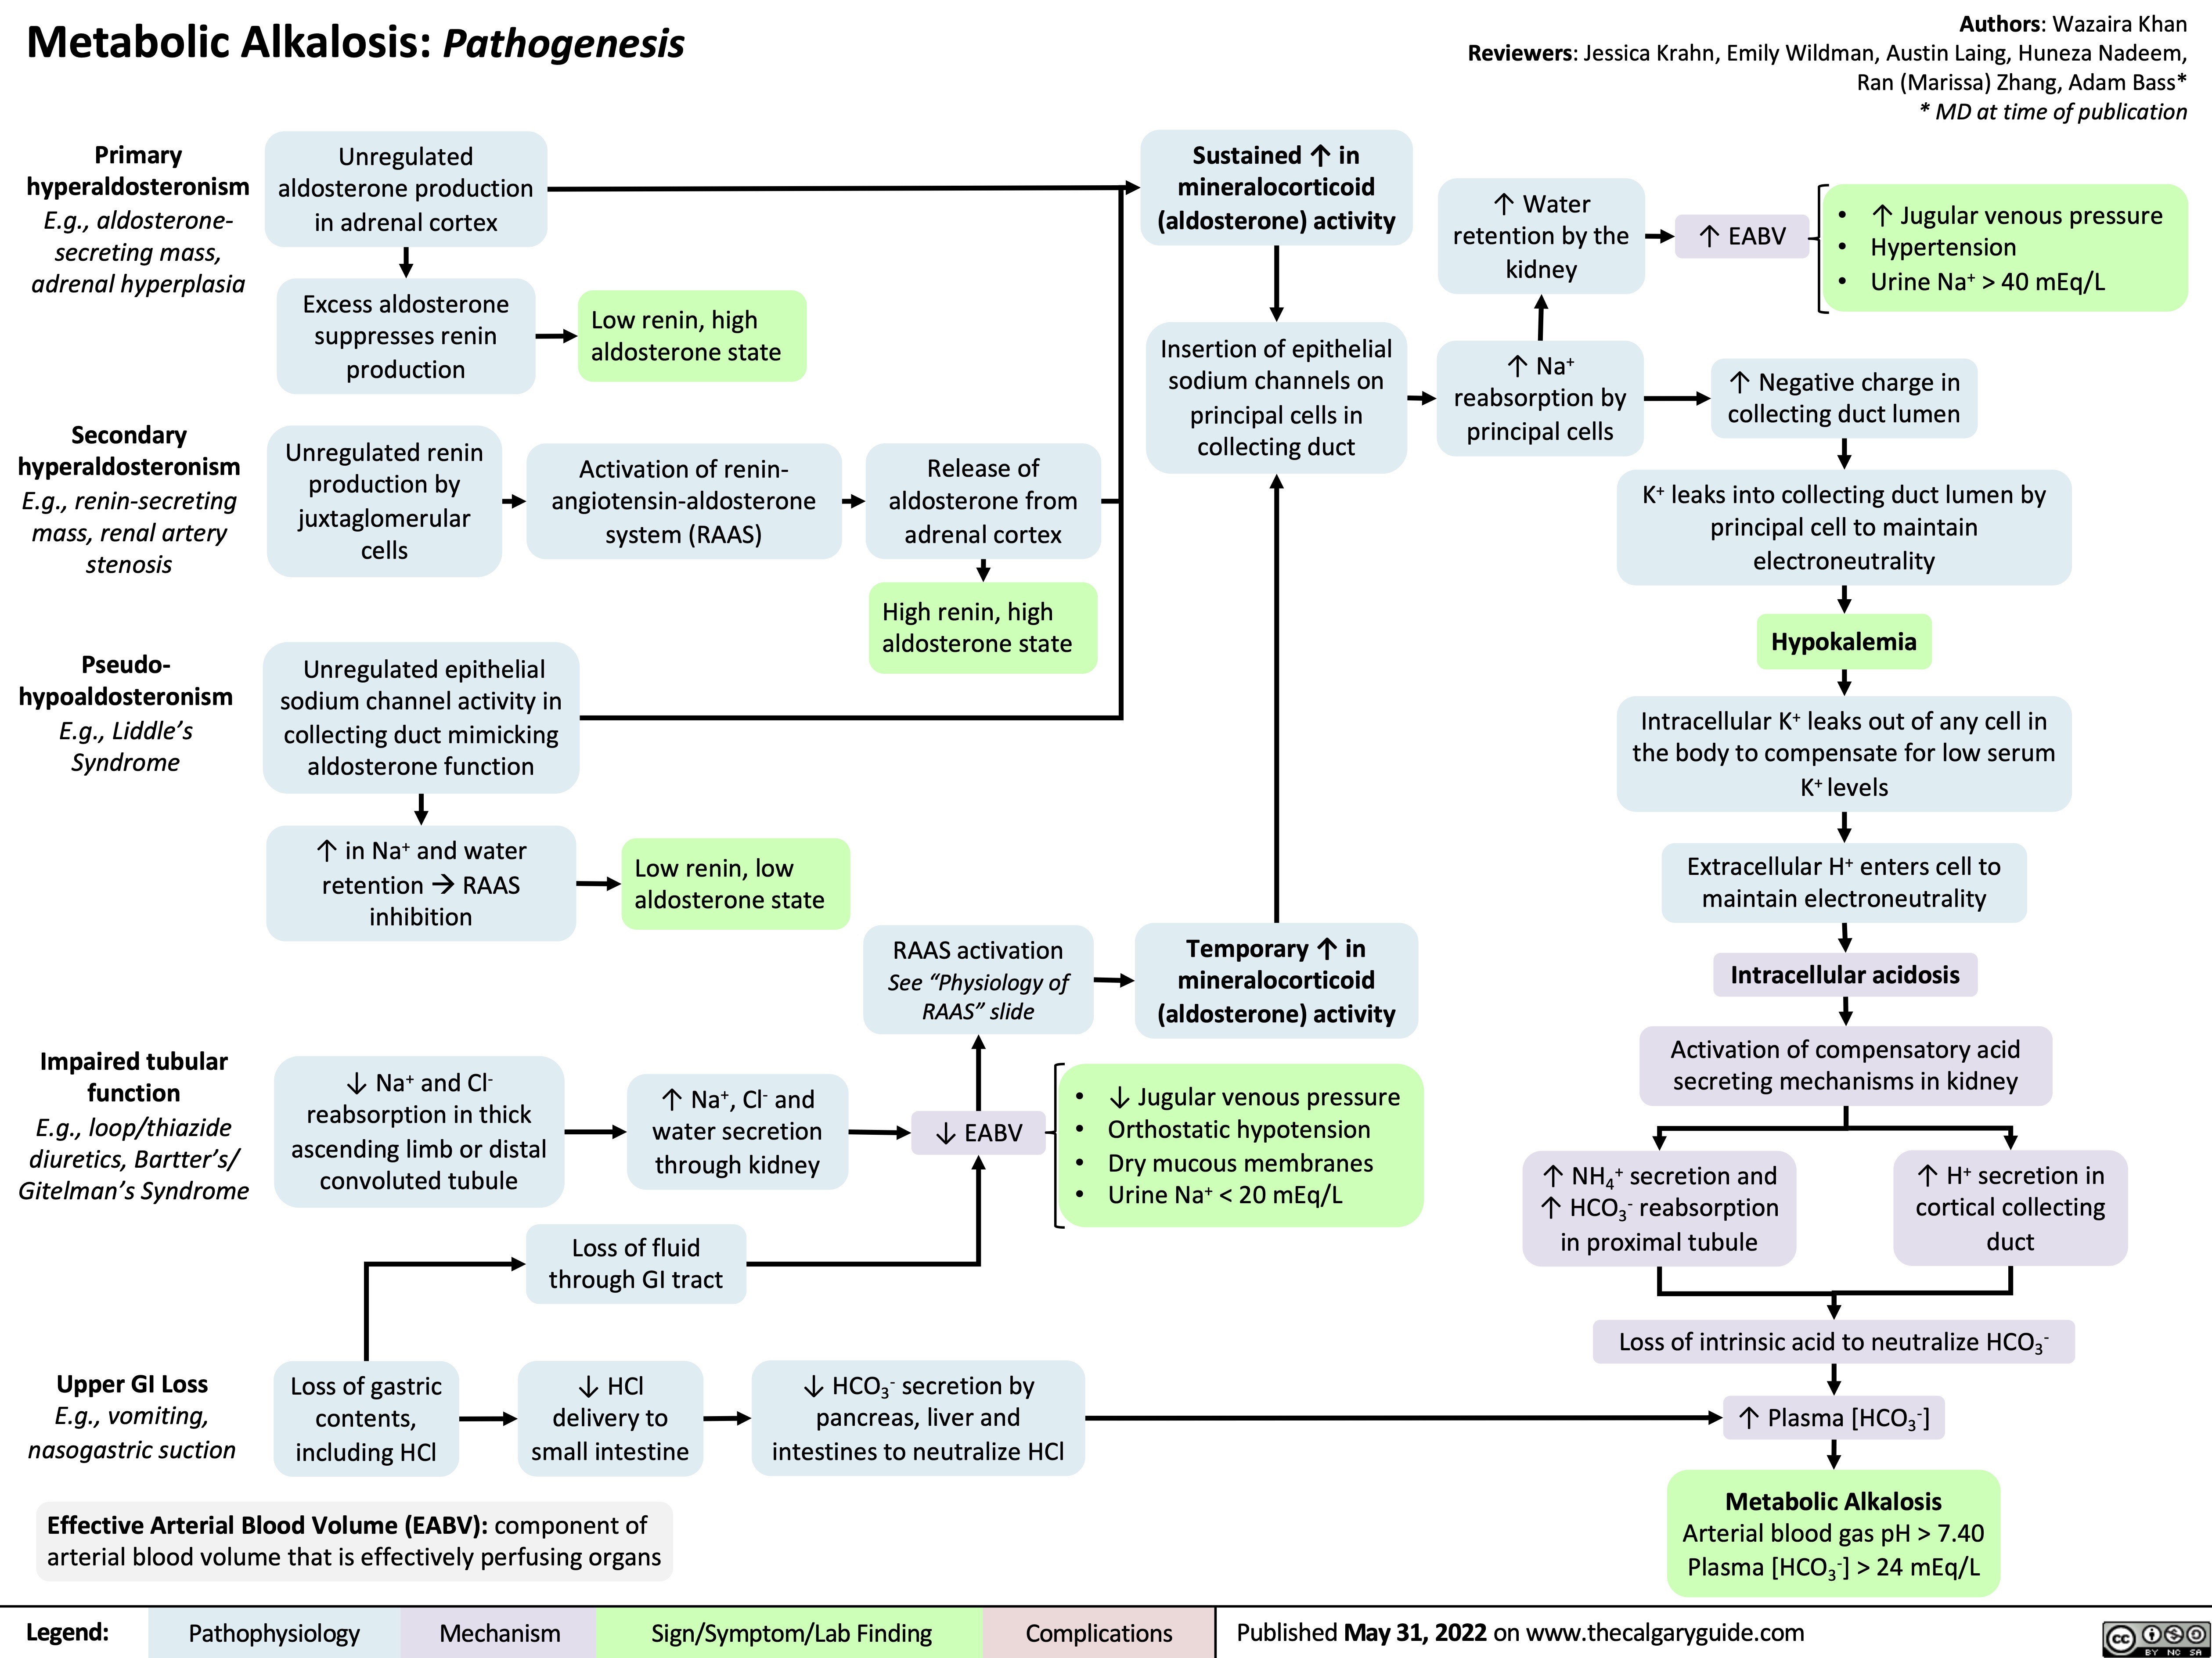 Metabolic Alkalosis: Pathogenesis
Authors: Wazaira Khan Reviewers: Jessica Krahn, Emily Wildman, Austin Laing, Huneza Nadeem, Ran (Marissa) Zhang, Adam Bass* * MD at time of publication
  Primary hyperaldosteronism E.g., aldosterone- secreting mass, adrenal hyperplasia
Secondary hyperaldosteronism E.g., renin-secreting mass, renal artery stenosis
Pseudo- hypoaldosteronism E.g., Liddle’s Syndrome
Unregulated aldosterone production in adrenal cortex
Excess aldosterone suppresses renin production
Unregulated renin production by juxtaglomerular cells
Sustained ↑ in mineralocorticoid (aldosterone) activity
Insertion of epithelial sodium channels on principal cells in collecting duct
↑ Water retention by the kidney
↑ Na+ reabsorption by principal cells
↑ EABV
• ↑ Jugular venous pressure • Hypertension
• Urine Na+ > 40 mEq/L
         Low renin, high aldosterone state
Activation of renin- angiotensin-aldosterone system (RAAS)
Release of aldosterone from adrenal cortex
High renin, high aldosterone state
↑ Negative charge in collecting duct lumen
K+ leaks into collecting duct lumen by principal cell to maintain electroneutrality
Hypokalemia
Intracellular K+ leaks out of any cell in the body to compensate for low serum K+ levels
Extracellular H+ enters cell to maintain electroneutrality
Intracellular acidosis
Activation of compensatory acid secreting mechanisms in kidney
                   Impaired tubular function
E.g., loop/thiazide diuretics, Bartter’s/ Gitelman’s Syndrome
Upper GI Loss
E.g., vomiting, nasogastric suction
Unregulated epithelial sodium channel activity in collecting duct mimicking aldosterone function
↑ in Na+ and water retention à RAAS inhibition
↓ Na+ and Cl- reabsorption in thick ascending limb or distal convoluted tubule
Low renin, low aldosterone state
↑ Na+, Cl- and water secretion through kidney
RAAS activation
See “Physiology of RAAS” slide
↓ EABV • • •
Temporary ↑ in mineralocorticoid (aldosterone) activity
↓ Jugular venous pressure Orthostatic hypotension Dry mucous membranes Urine Na+ < 20 mEq/L
    •
       Loss of fluid through GI tract
↓ HCl delivery to small intestine
↑ NH + secretion and 4
↑ HCO3- reabsorption in proximal tubule
↑ H+ secretion in cortical collecting duct
      Loss of gastric contents, including HCl
↓ HCO3- secretion by pancreas, liver and intestines to neutralize HCl
Loss of intrinsic acid to neutralize HCO3- ↑ Plasma [HCO3-]
Metabolic Alkalosis
Arterial blood gas pH > 7.40 Plasma [HCO3-] > 24 mEq/L
    Effective Arterial Blood Volume (EABV): component of arterial blood volume that is effectively perfusing organs
 Legend:
 Pathophysiology
Mechanism
Sign/Symptom/Lab Finding
 Complications
Published May 31, 2022 on www.thecalgaryguide.com
    